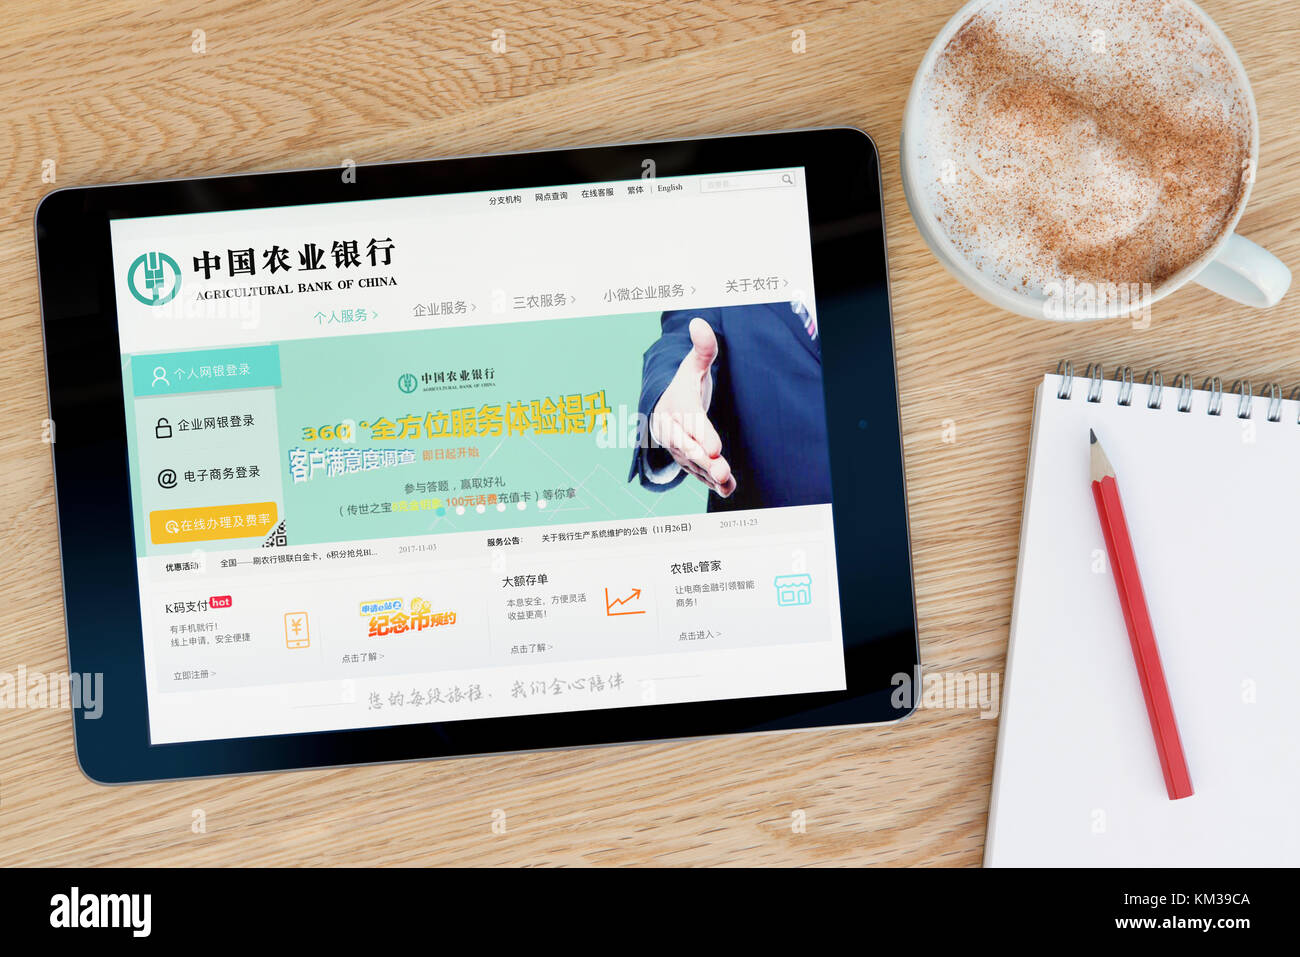 The Agricultural Bank of China website on an iPad tablet device which rests on a wooden table beside a notepad and pencil and a cup of coffee. Stock Photo